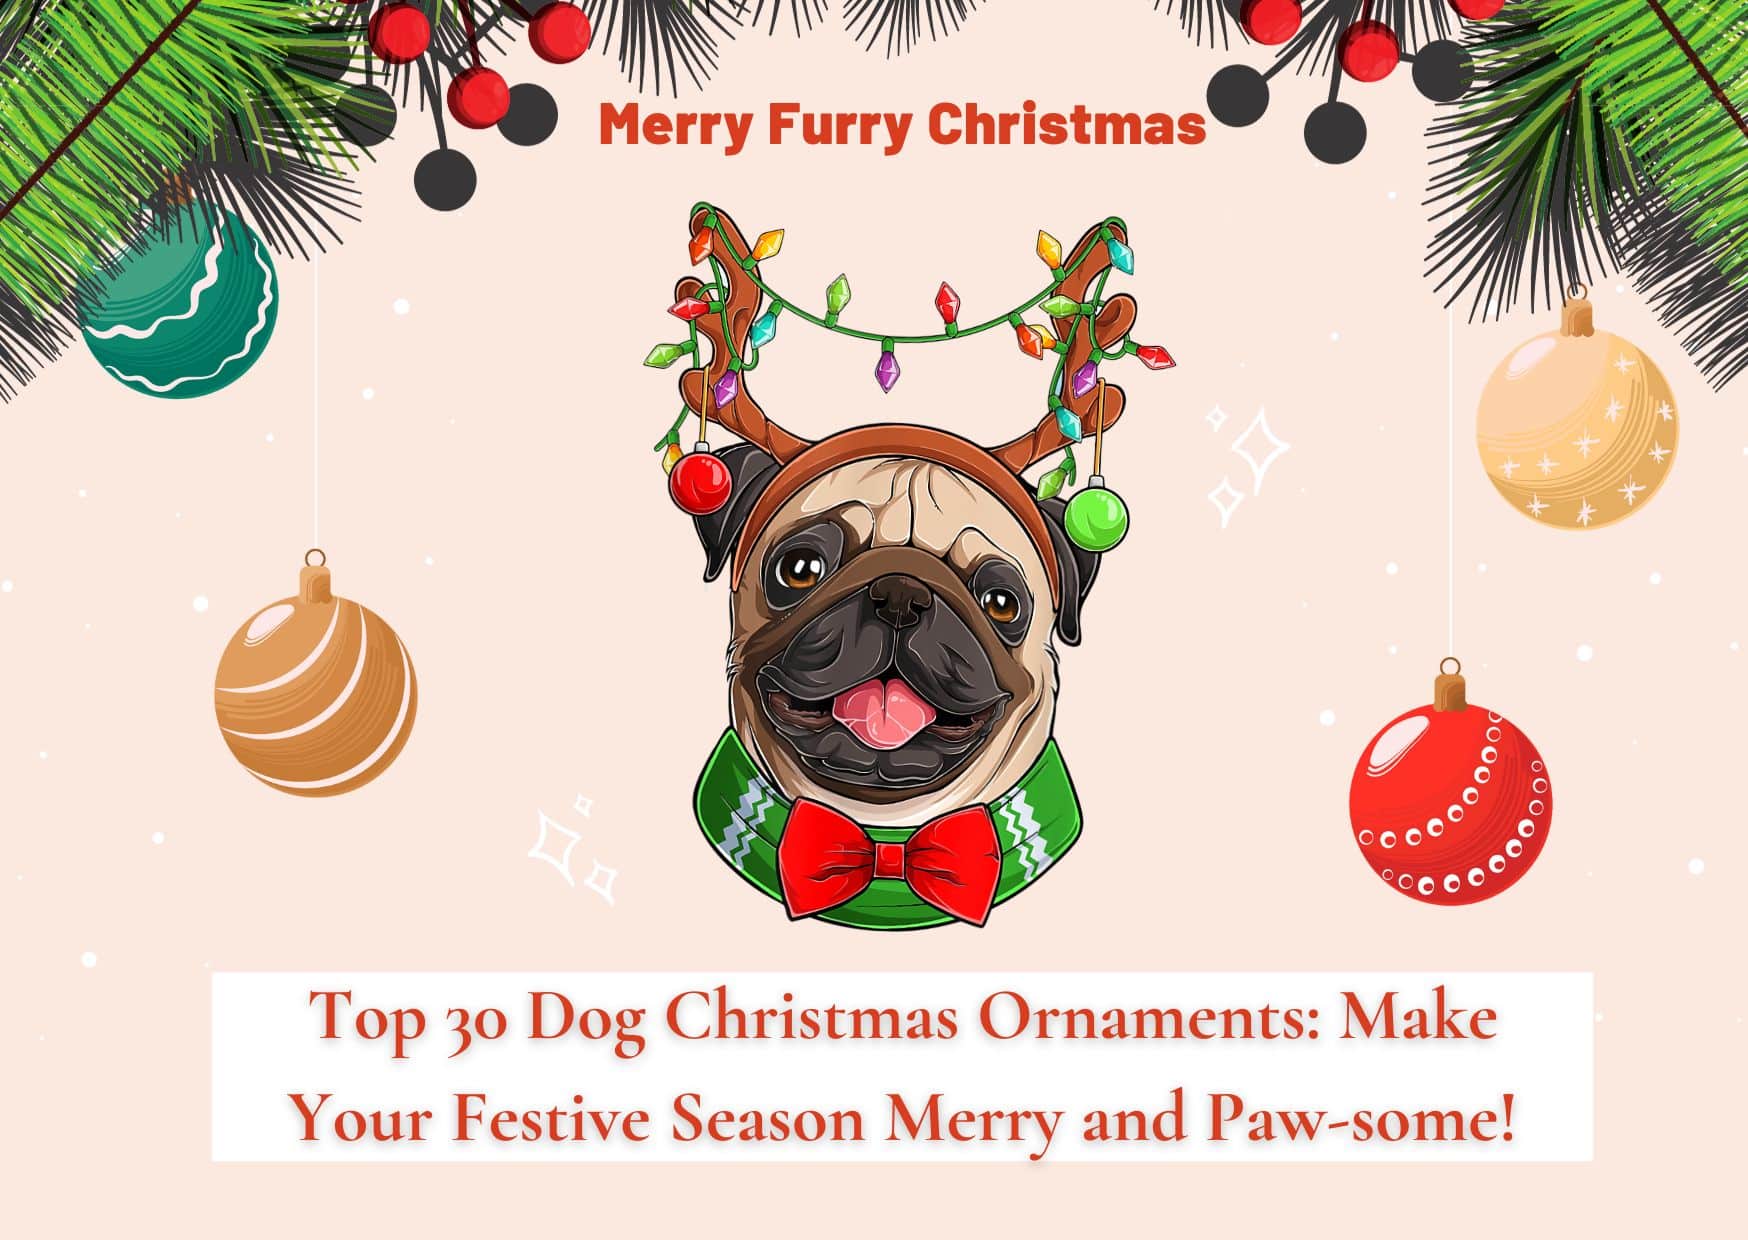 Top 30 Dog Christmas Ornaments Make Your Festive Season Merry and Paw-some!